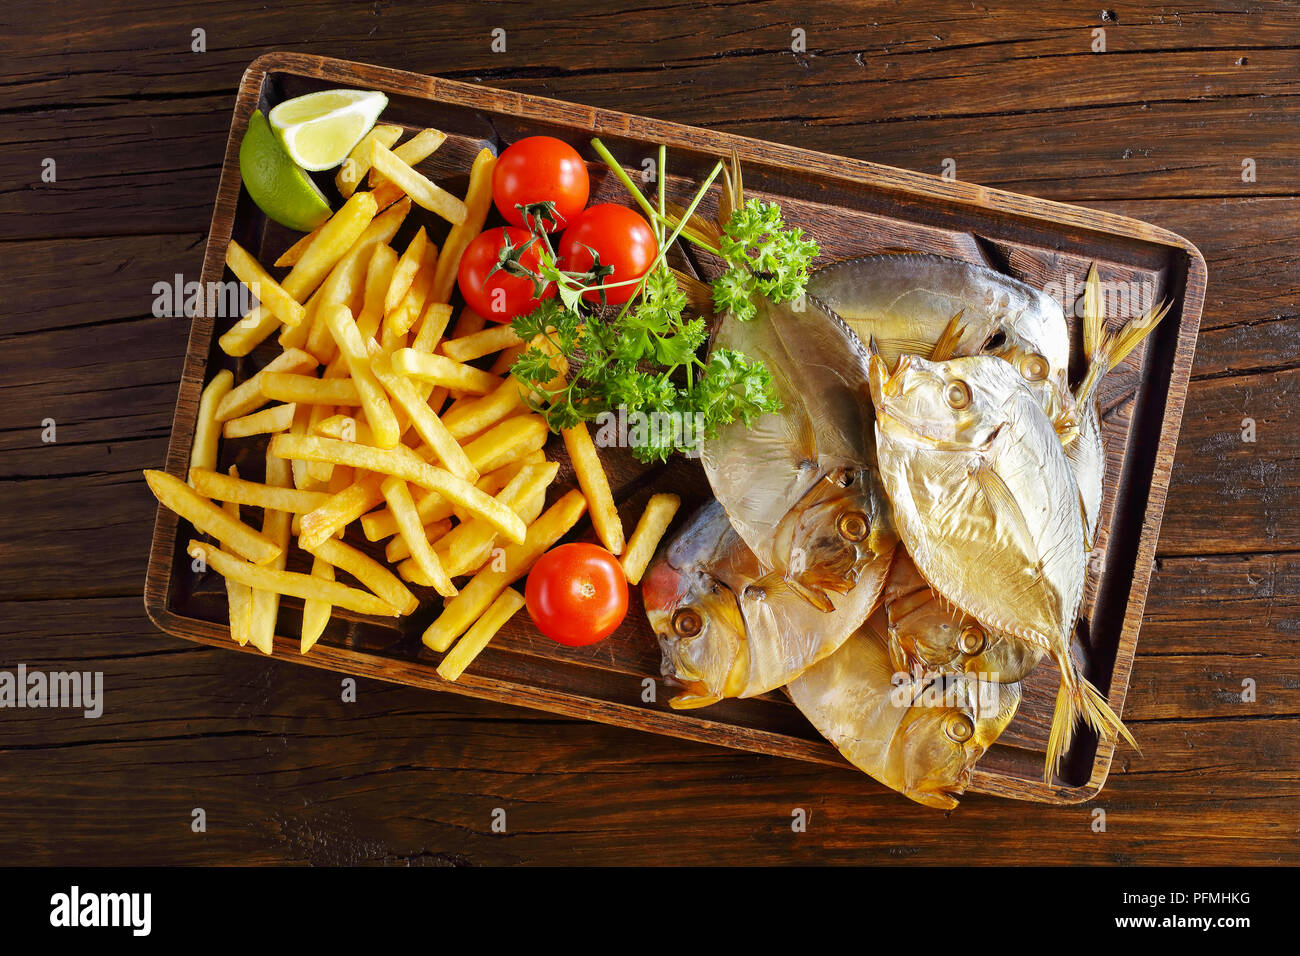 delicious cold smoked moonfish and chips served on brown cutting board on rustic wooden table, view from above Stock Photo